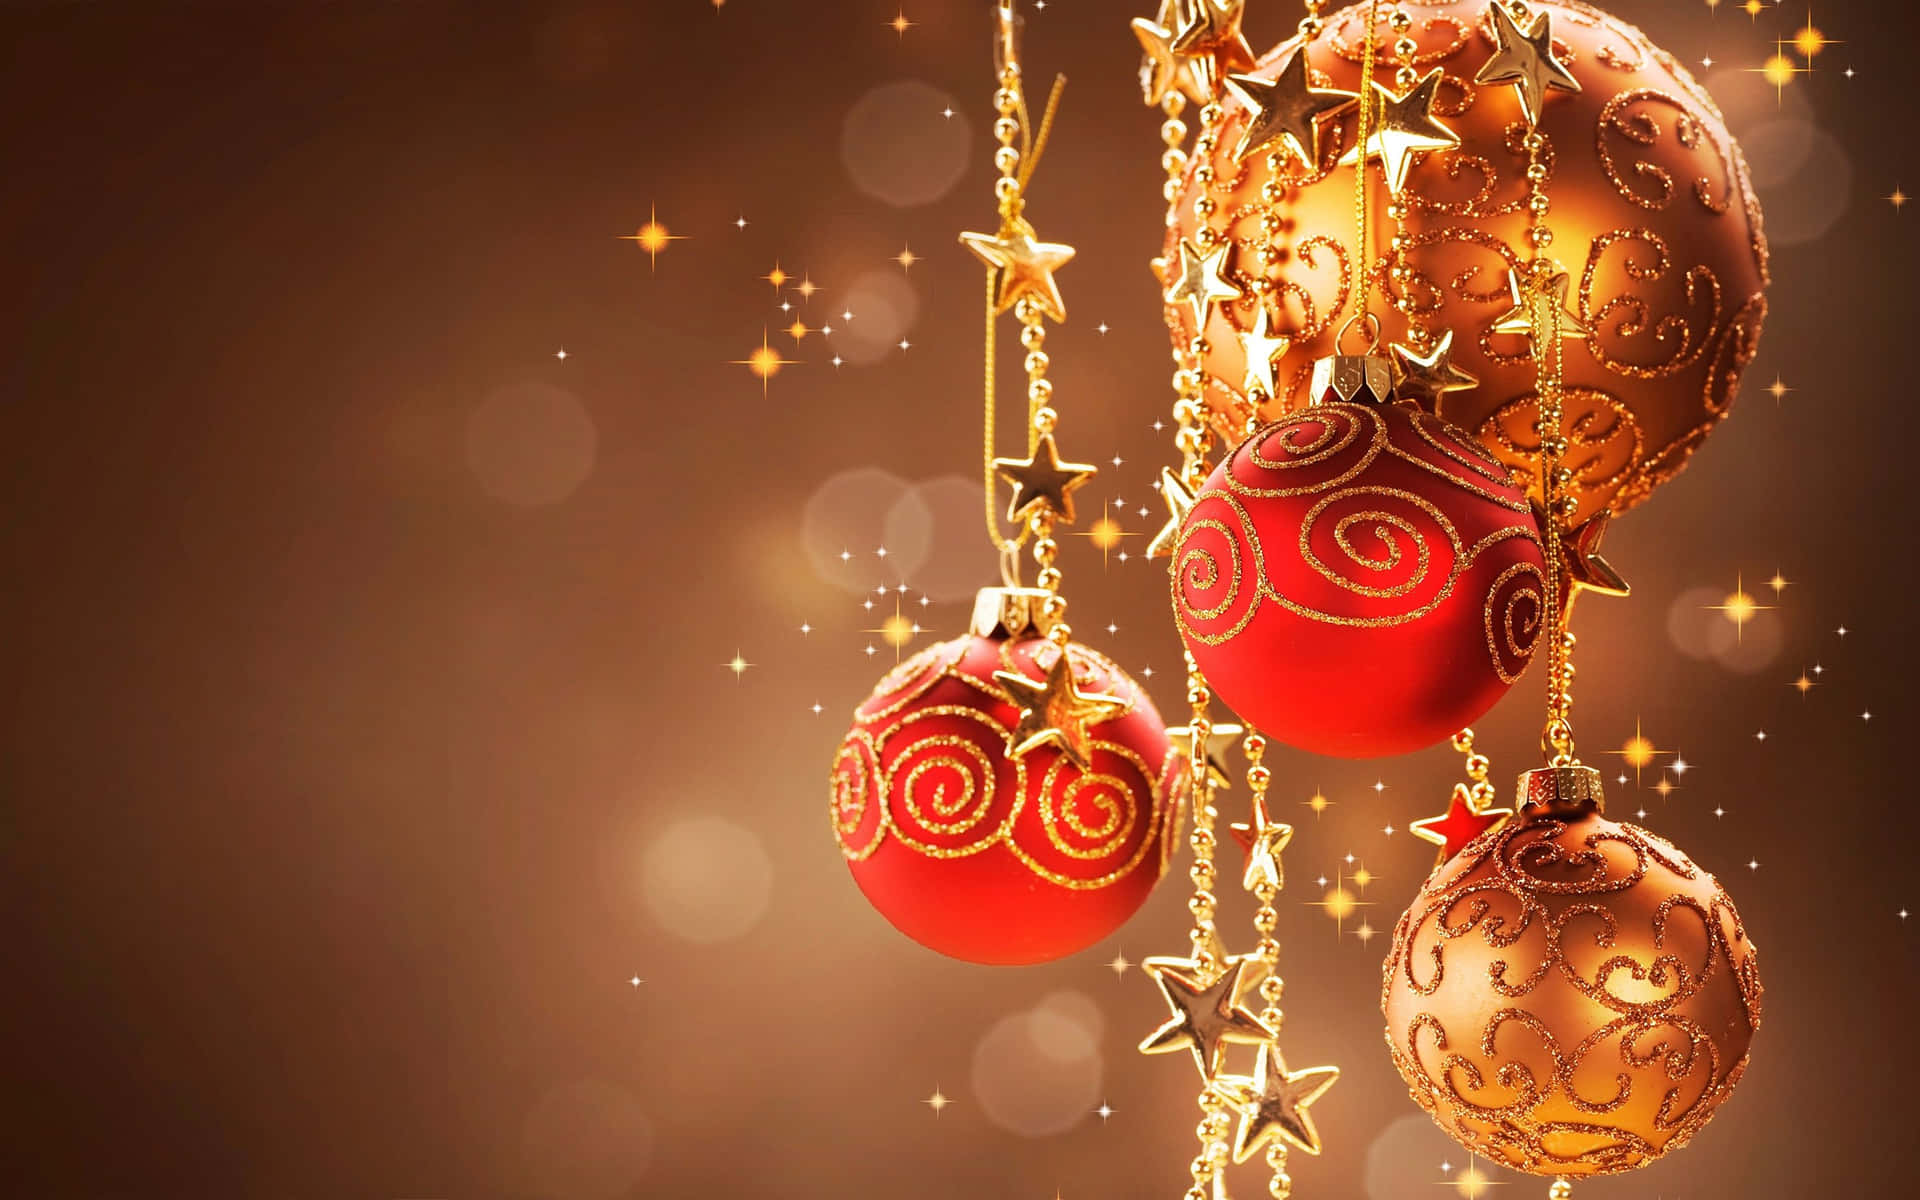 Enjoy the party season with a festive background!